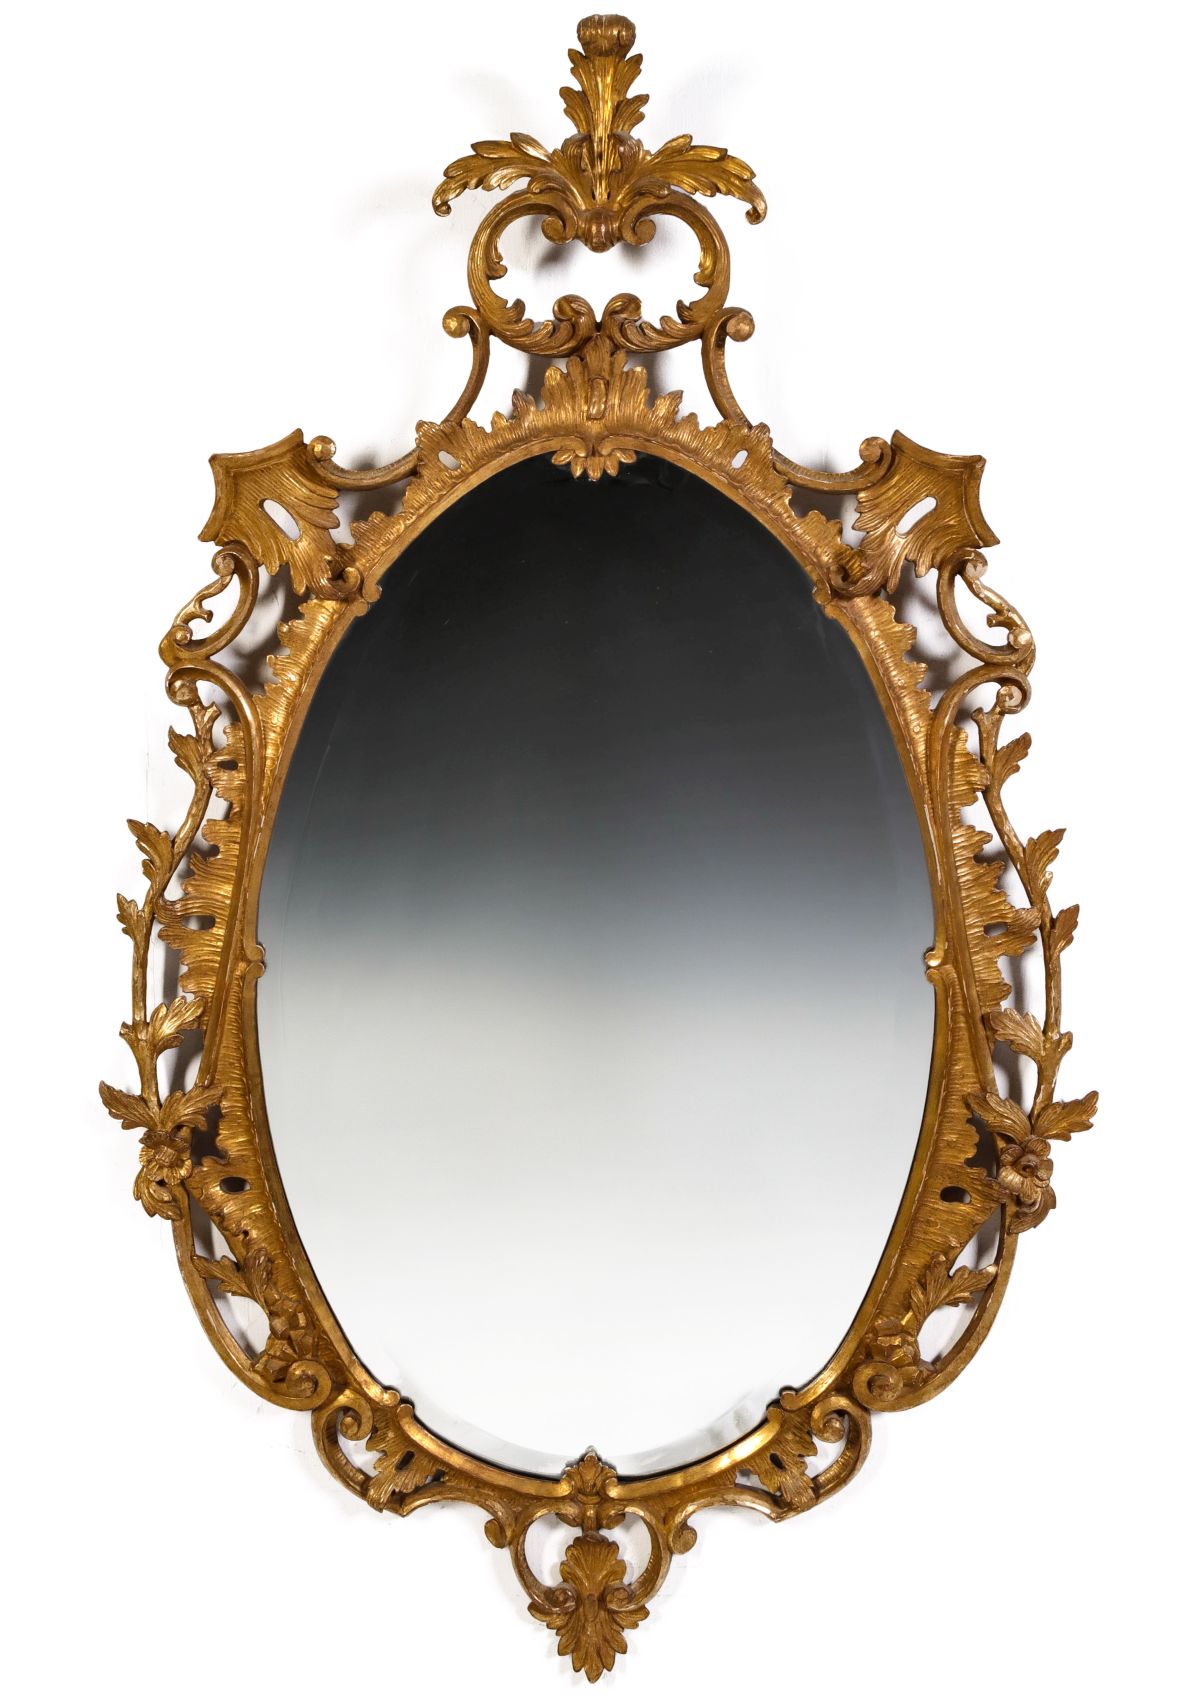 AN ADAM STYLE CARVED AND GILDED WOOD MIRROR CIRCA 1930